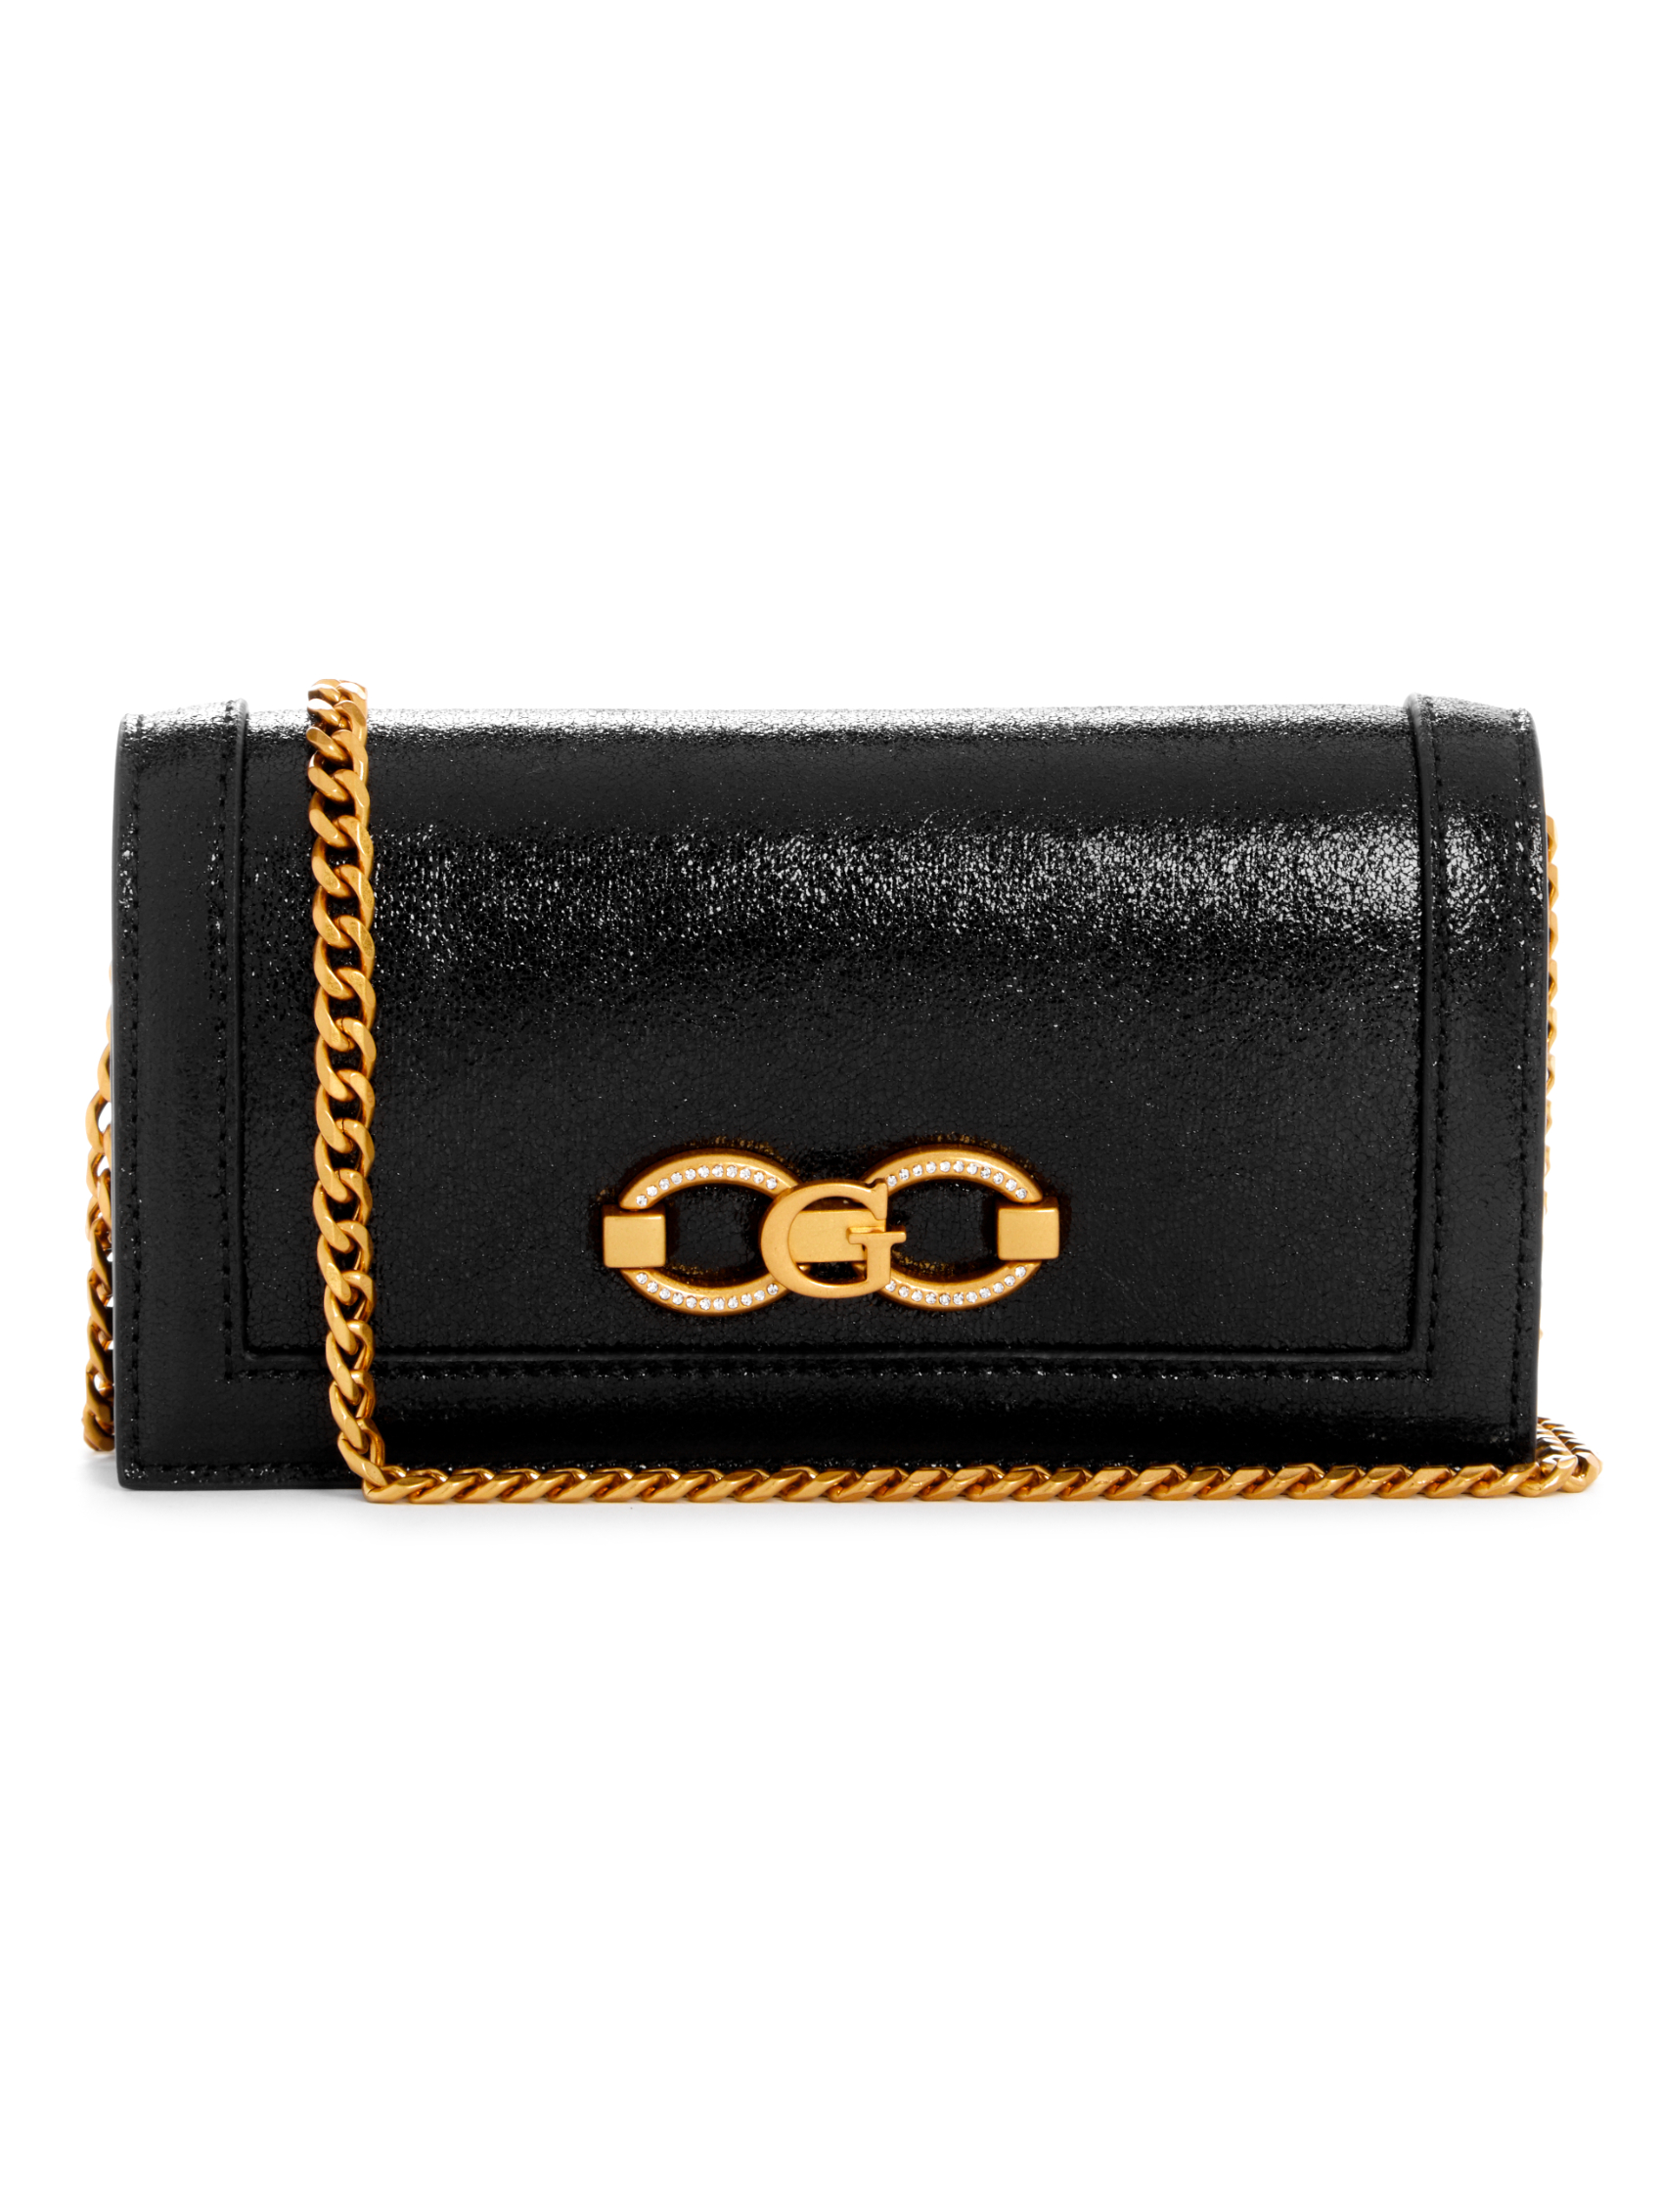 GILDED GLAMOUR CROSSBODY CLUTCH | Guess Philippines